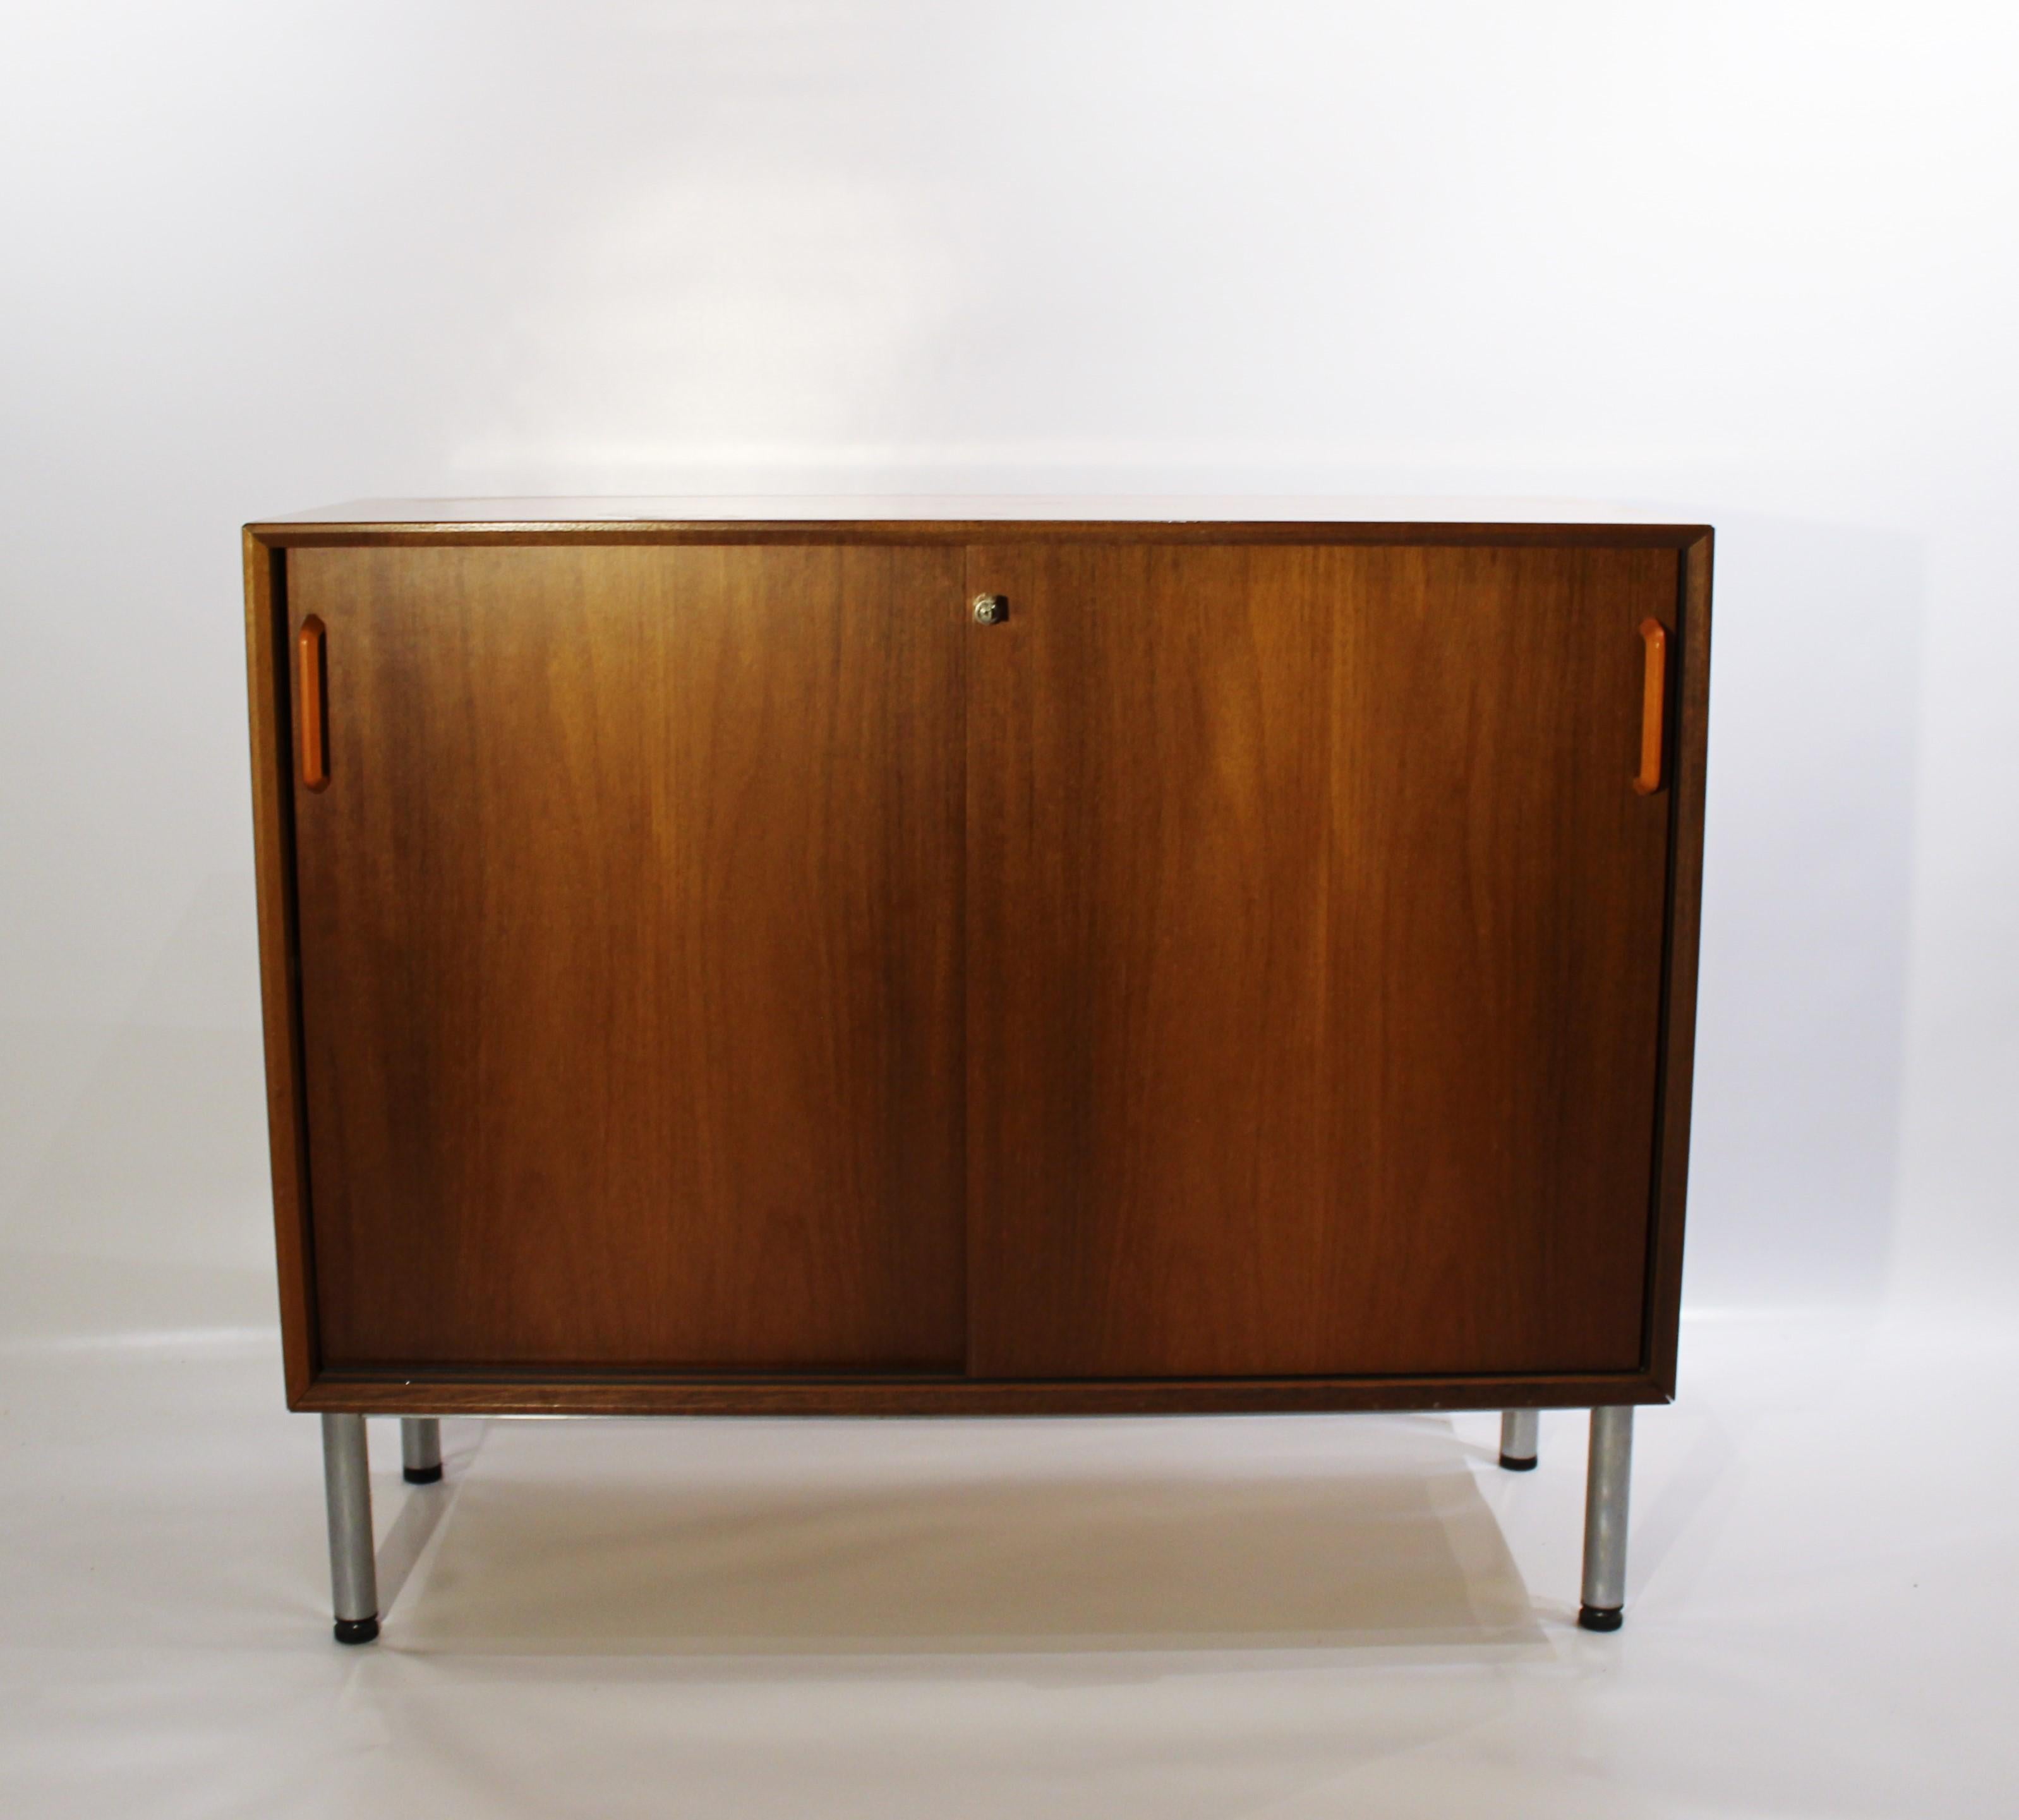 This cabinet with sliding doors in light mahogany is a characteristic example of Danish design from the 1960s. With its elegant and functional design, it fits perfectly with the period aesthetics of this era. The cabinet's sliding doors make it